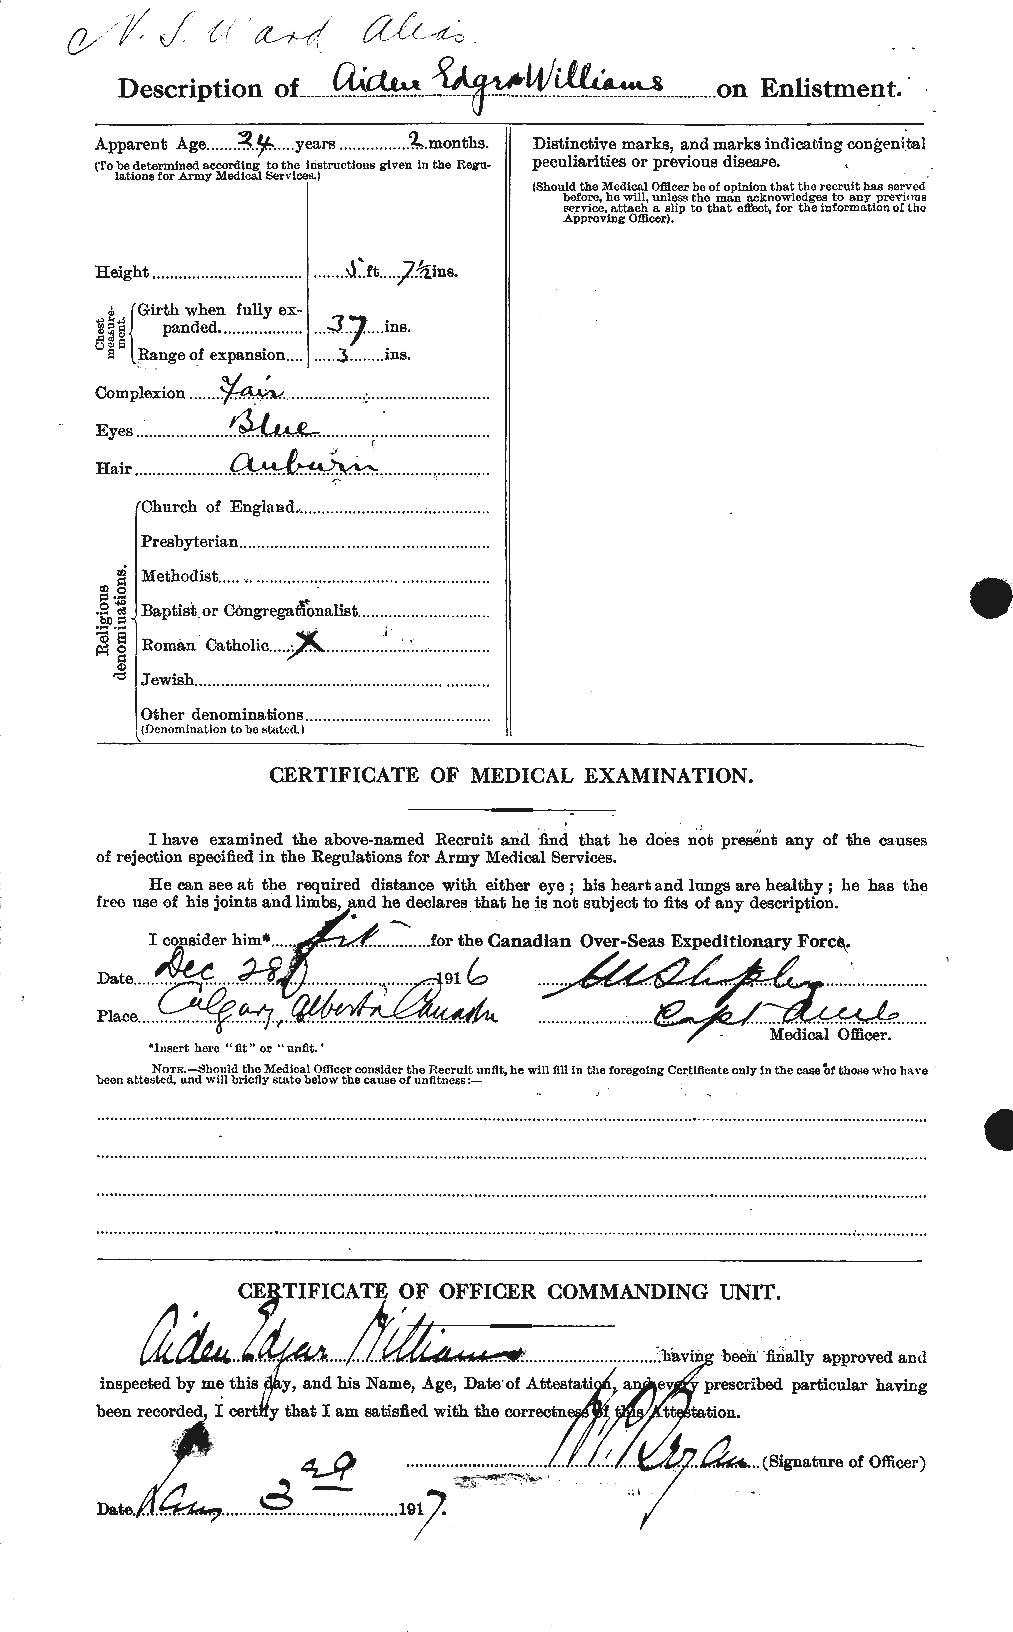 Personnel Records of the First World War - CEF 655079b